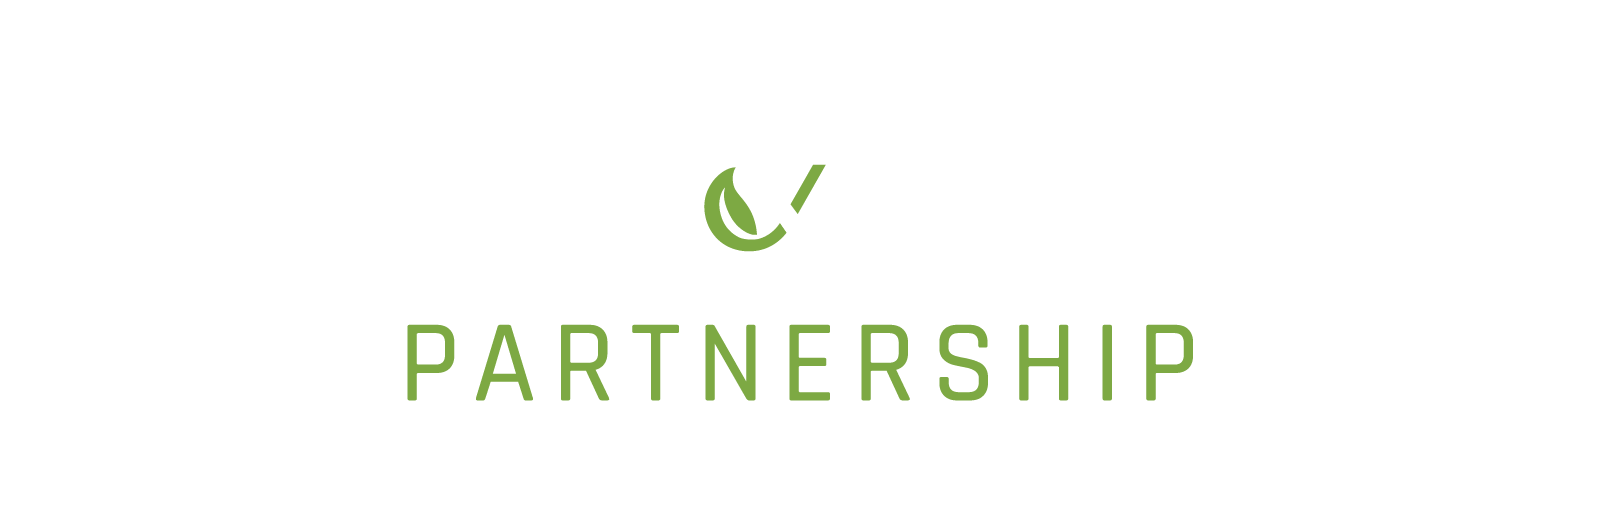 fishers and farmers color logo